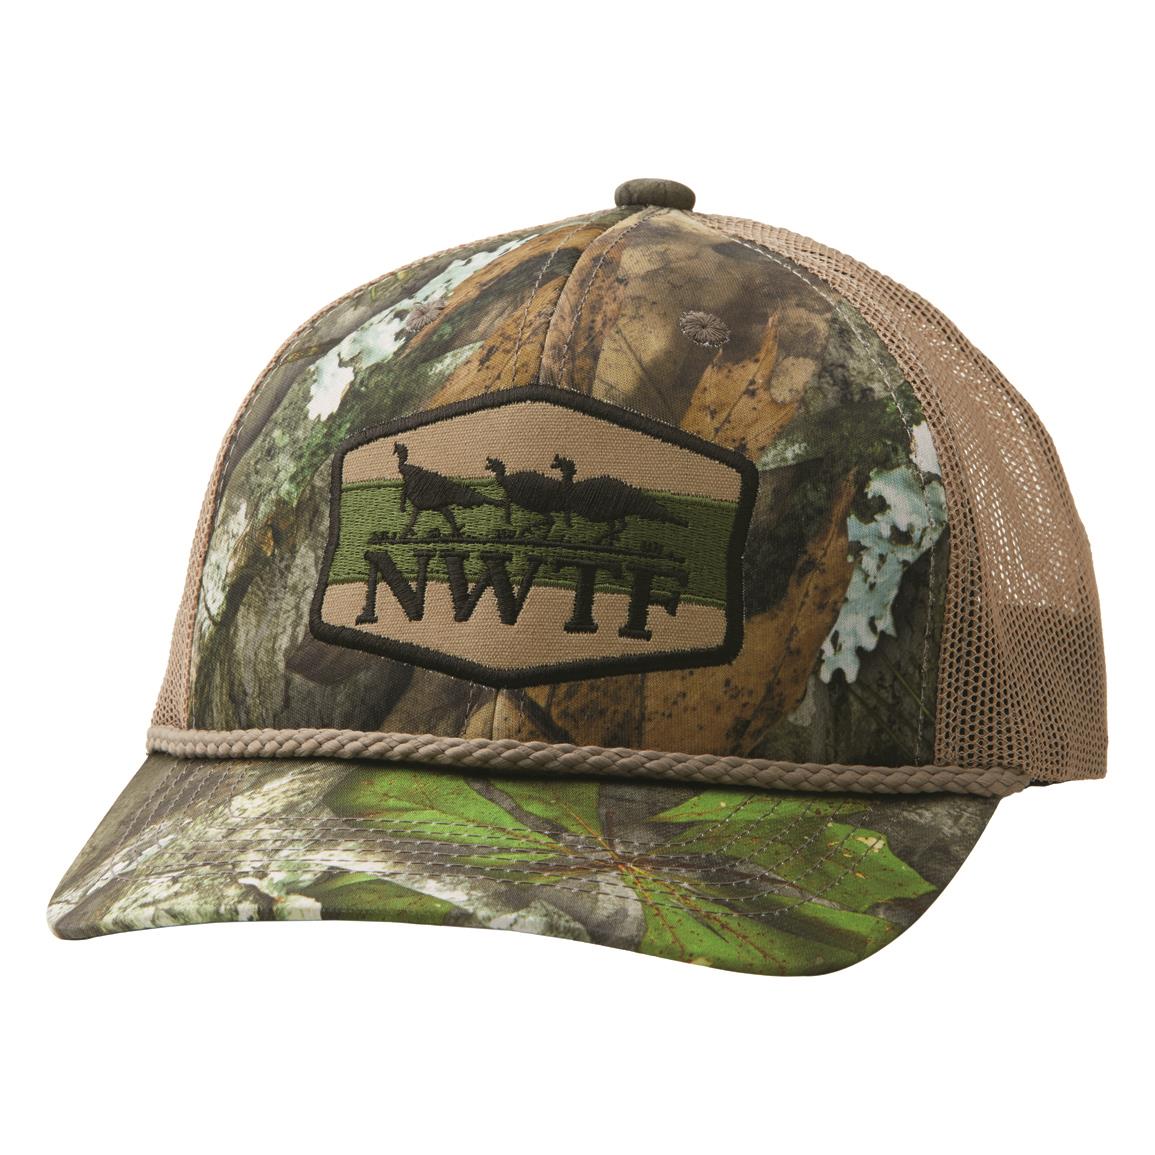 NOMAD NWTF Trucker Cap, Mossy Oak Obsession®